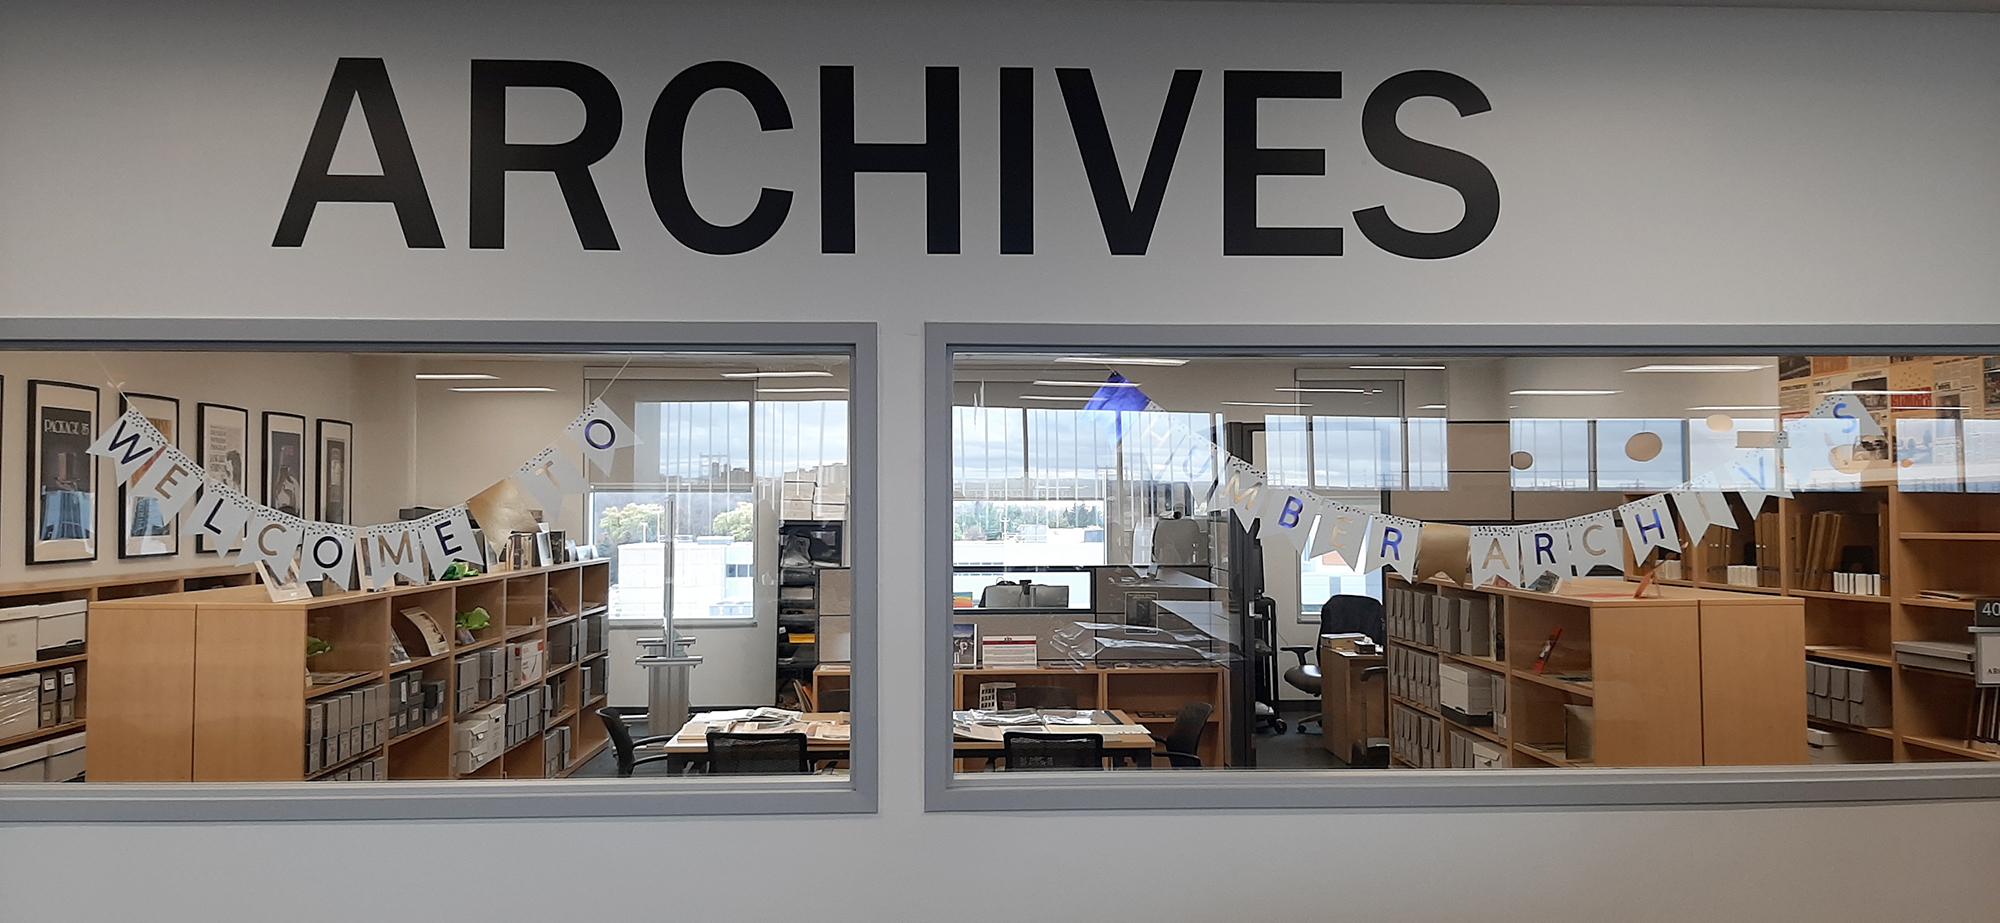 A room filled with books and other material with the word Archives written above it.